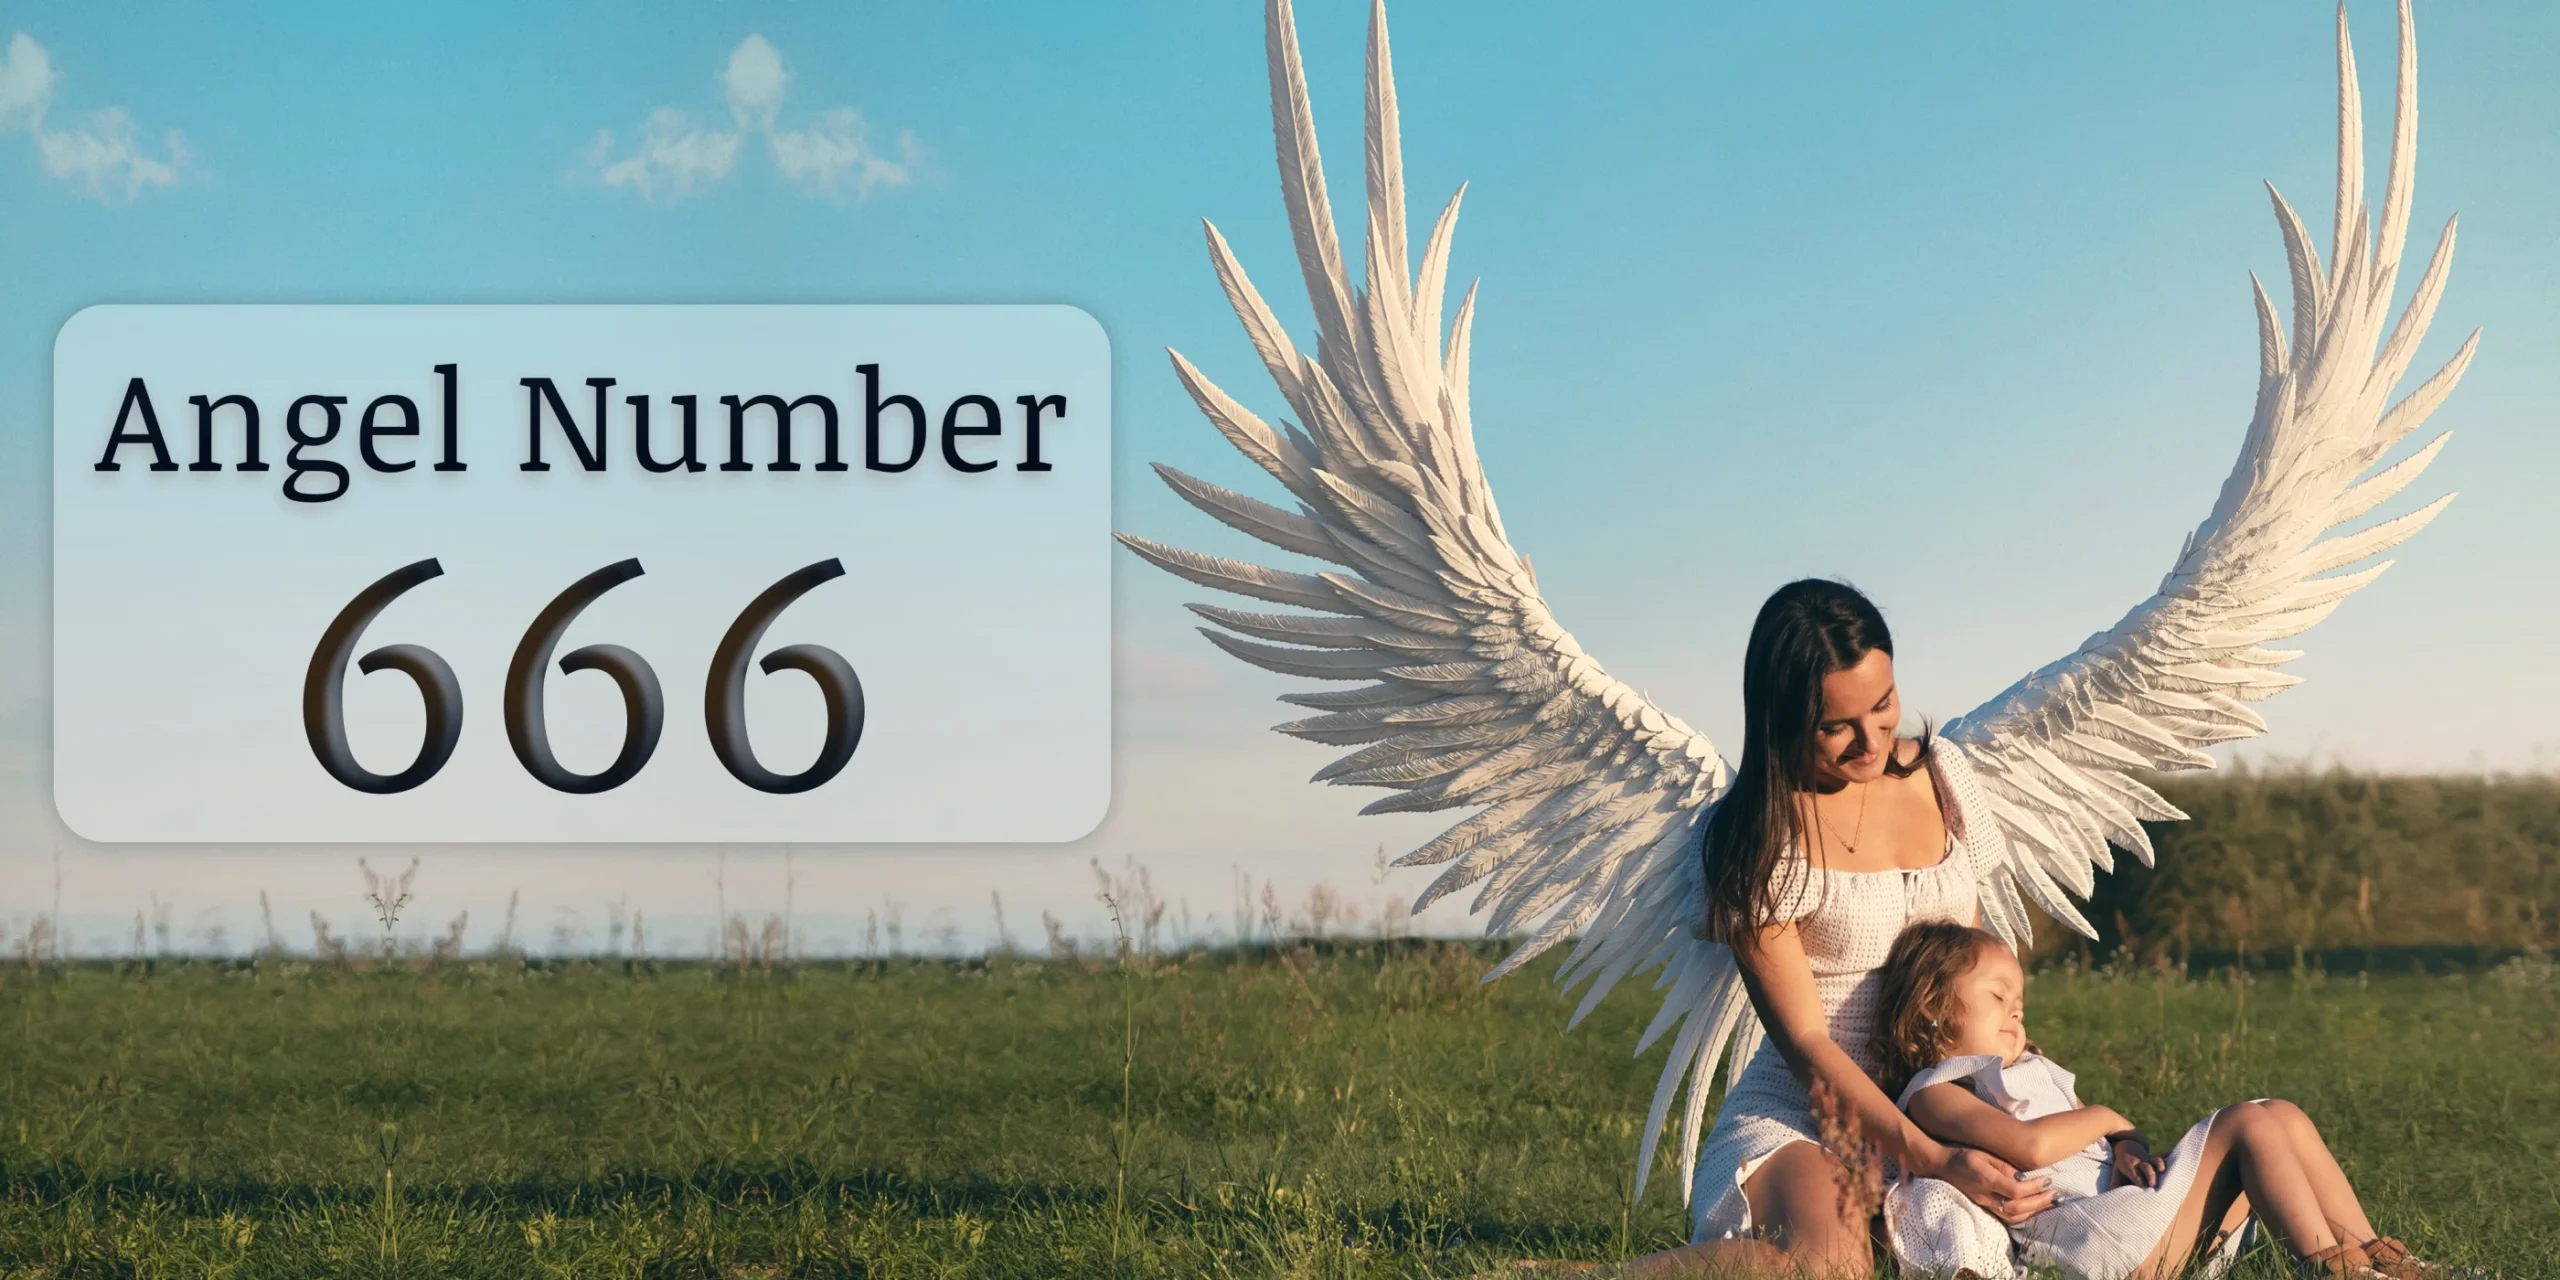 Angel Number 666 Meaning in Love, Career, in Numerology